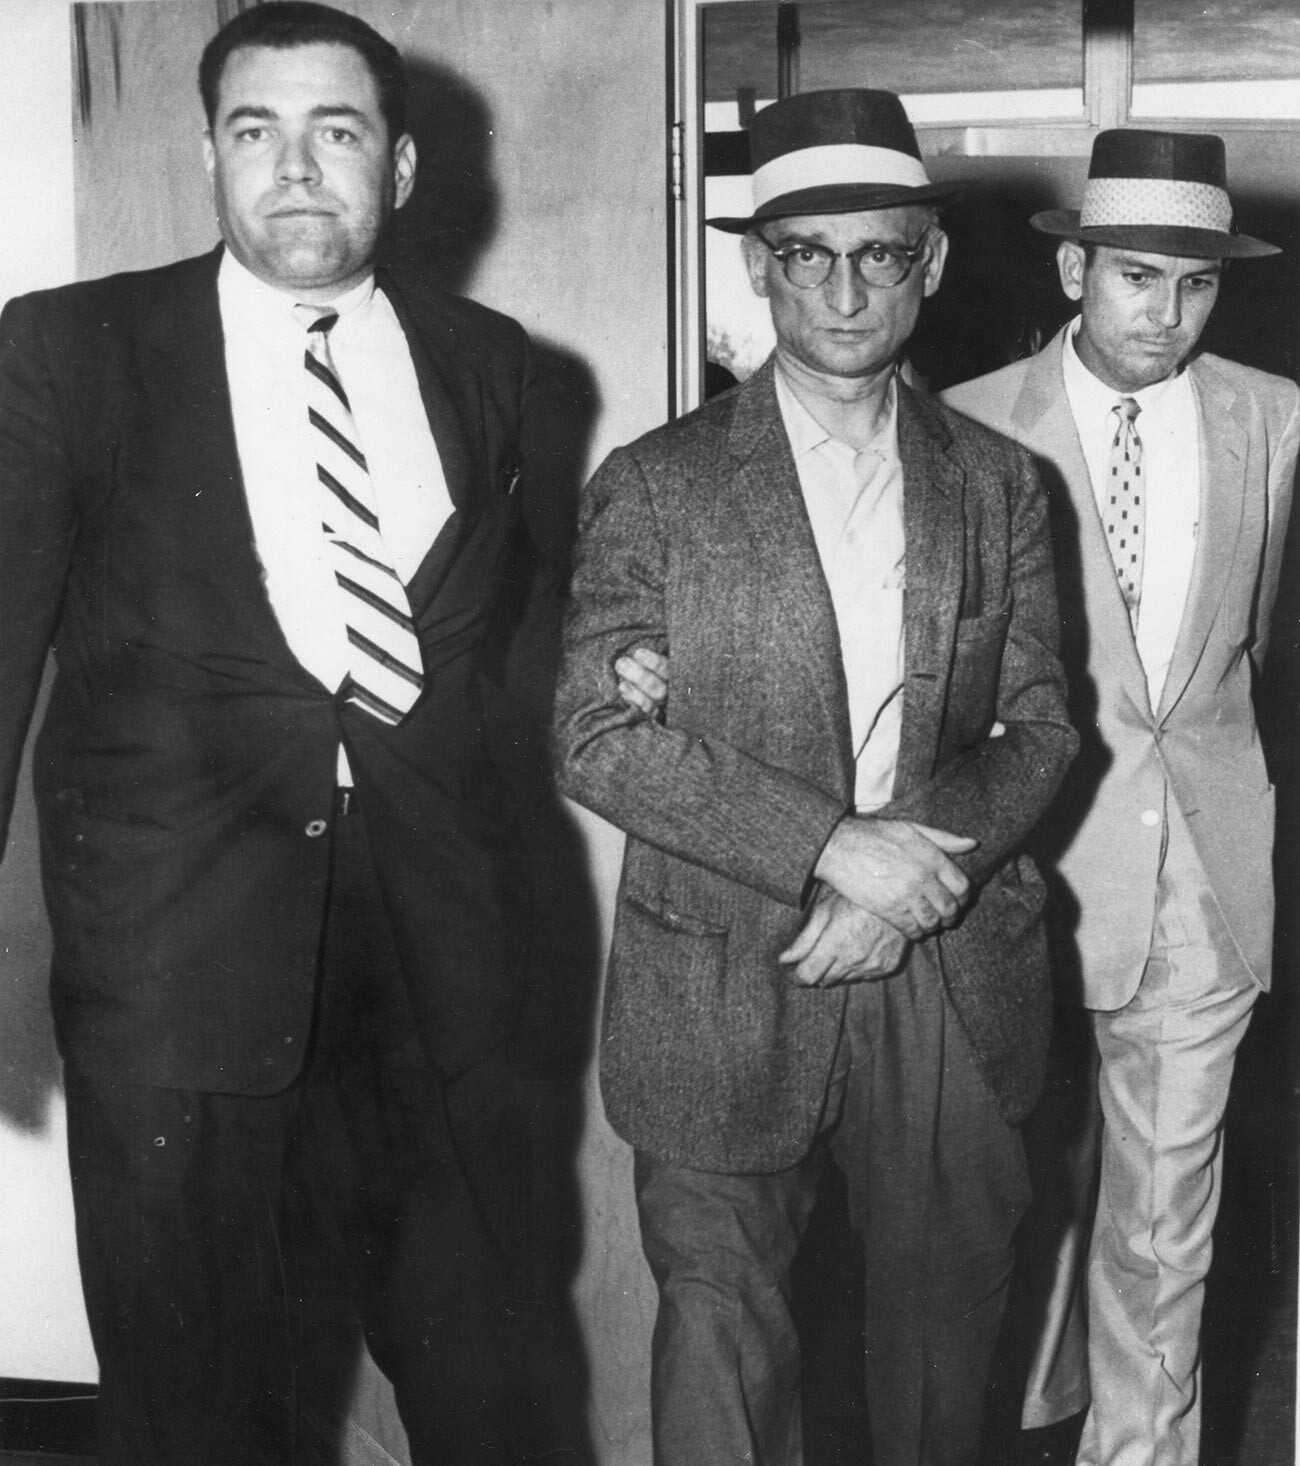 Rudolph Abel (center) arrives at court for his arraignment on espionage charges, New York, July 1957.